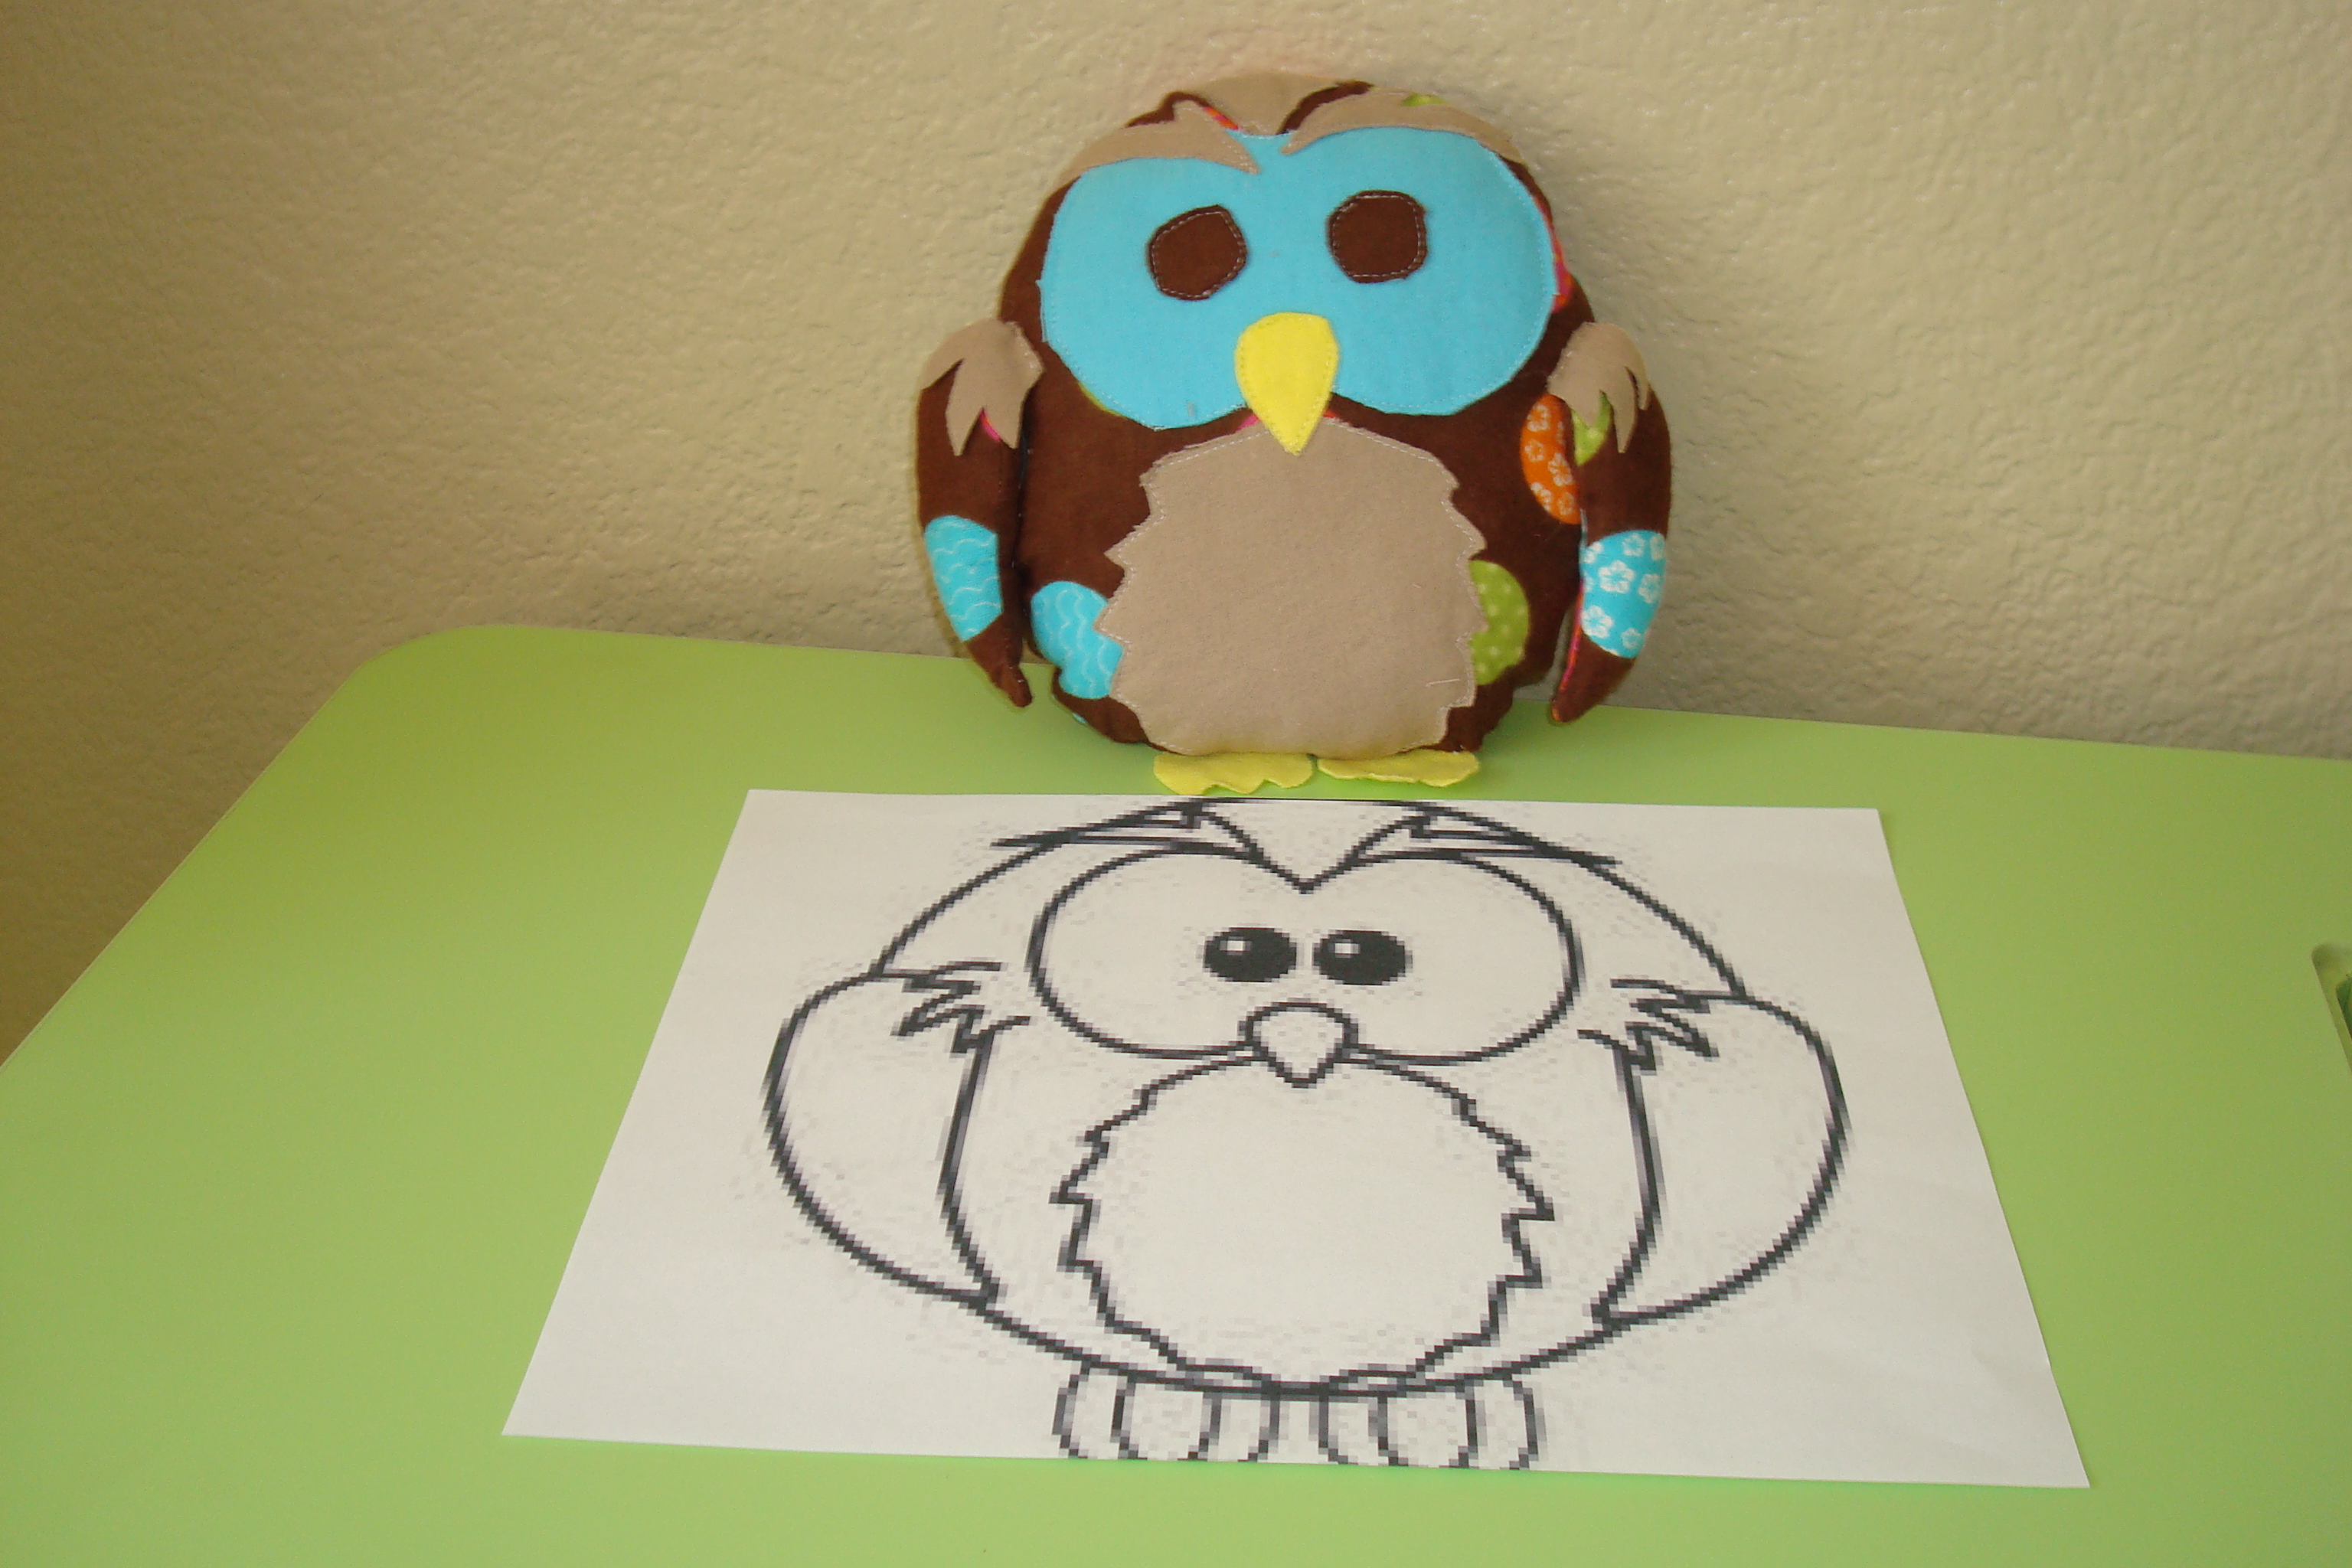 Sewn owl next to the template